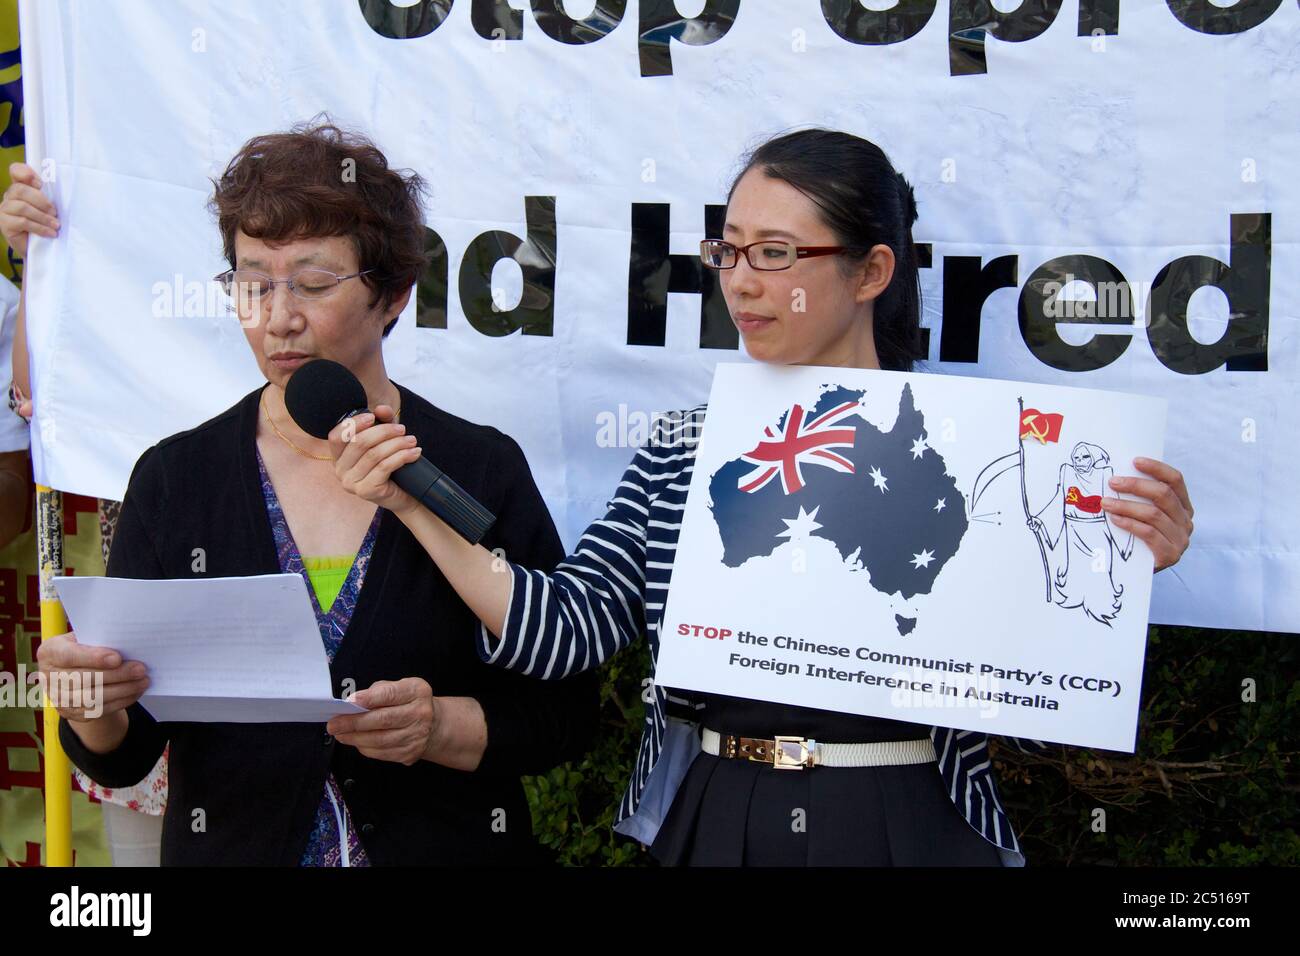 A lady who practices Falun Gong (Falun Dafa) speaks about her treatment in China at the hands of the Chinese Communist Party (CCP) at the protest outs Stock Photo